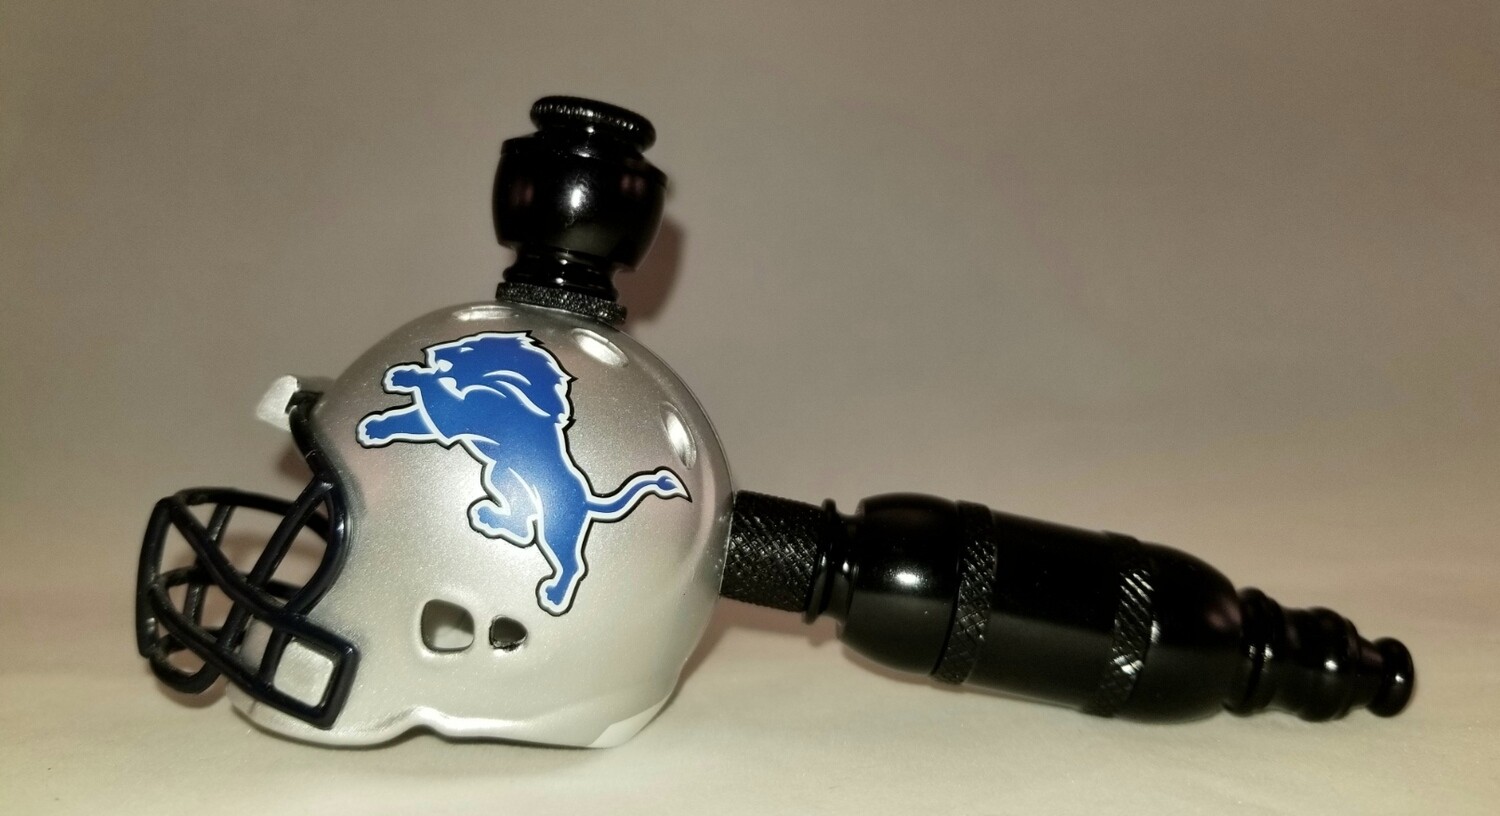 DETROIT LIONS "BAD ASS" NFL FOOTBALL HELMET SMOKING PIPE Straight/Black Anodized/Vintage